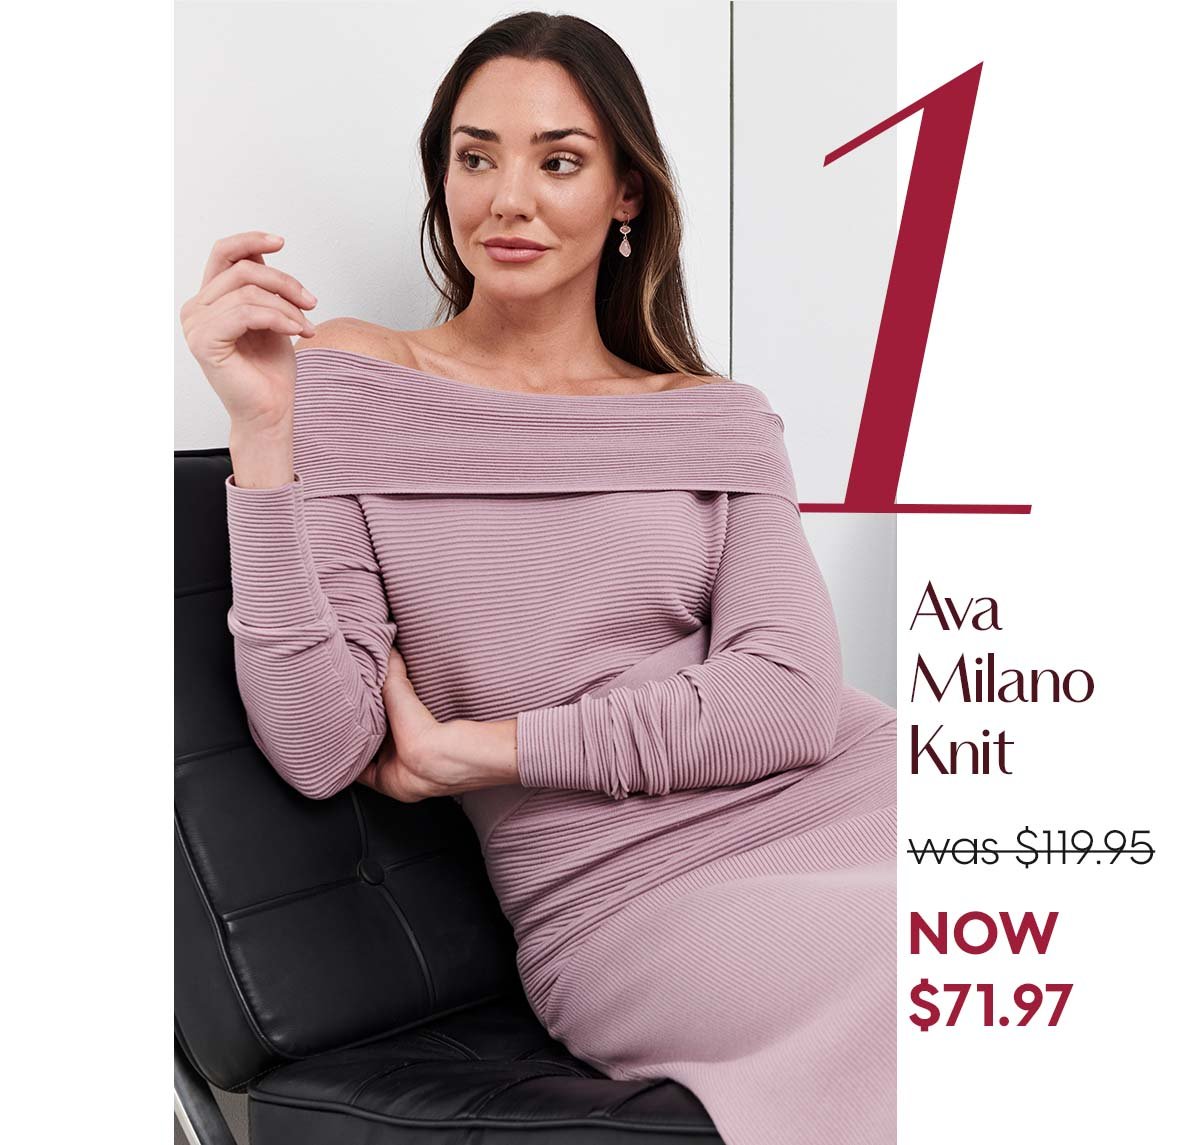 1. Ava Milano Knit was $119.95 NOW $71.97